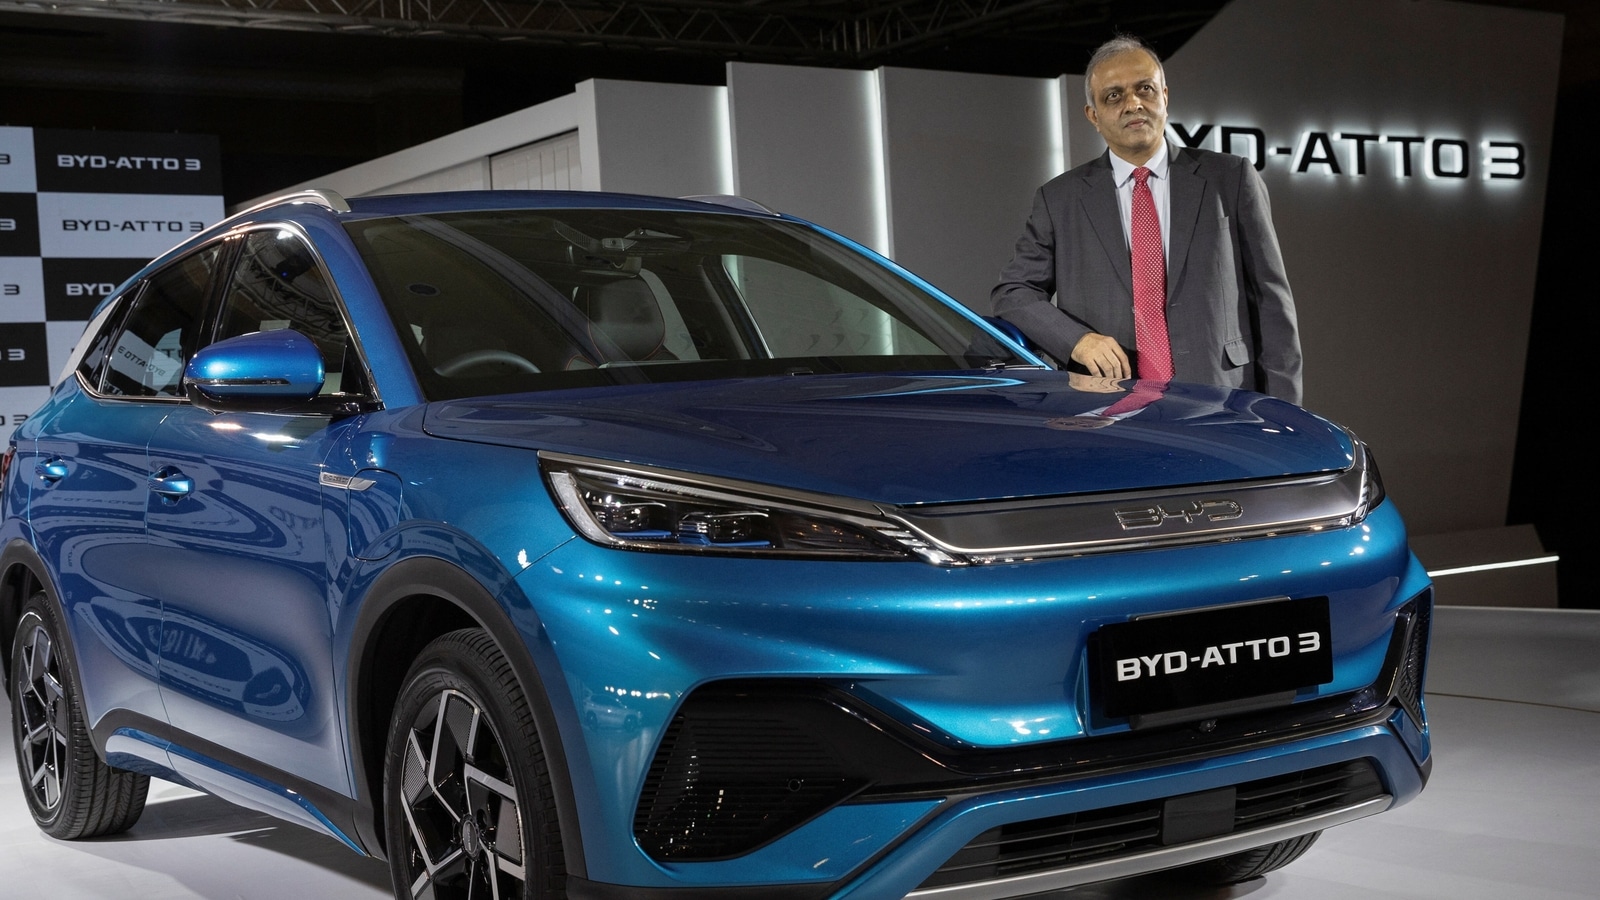 BYD launches Atto 3 in India, book this electric SUV at token